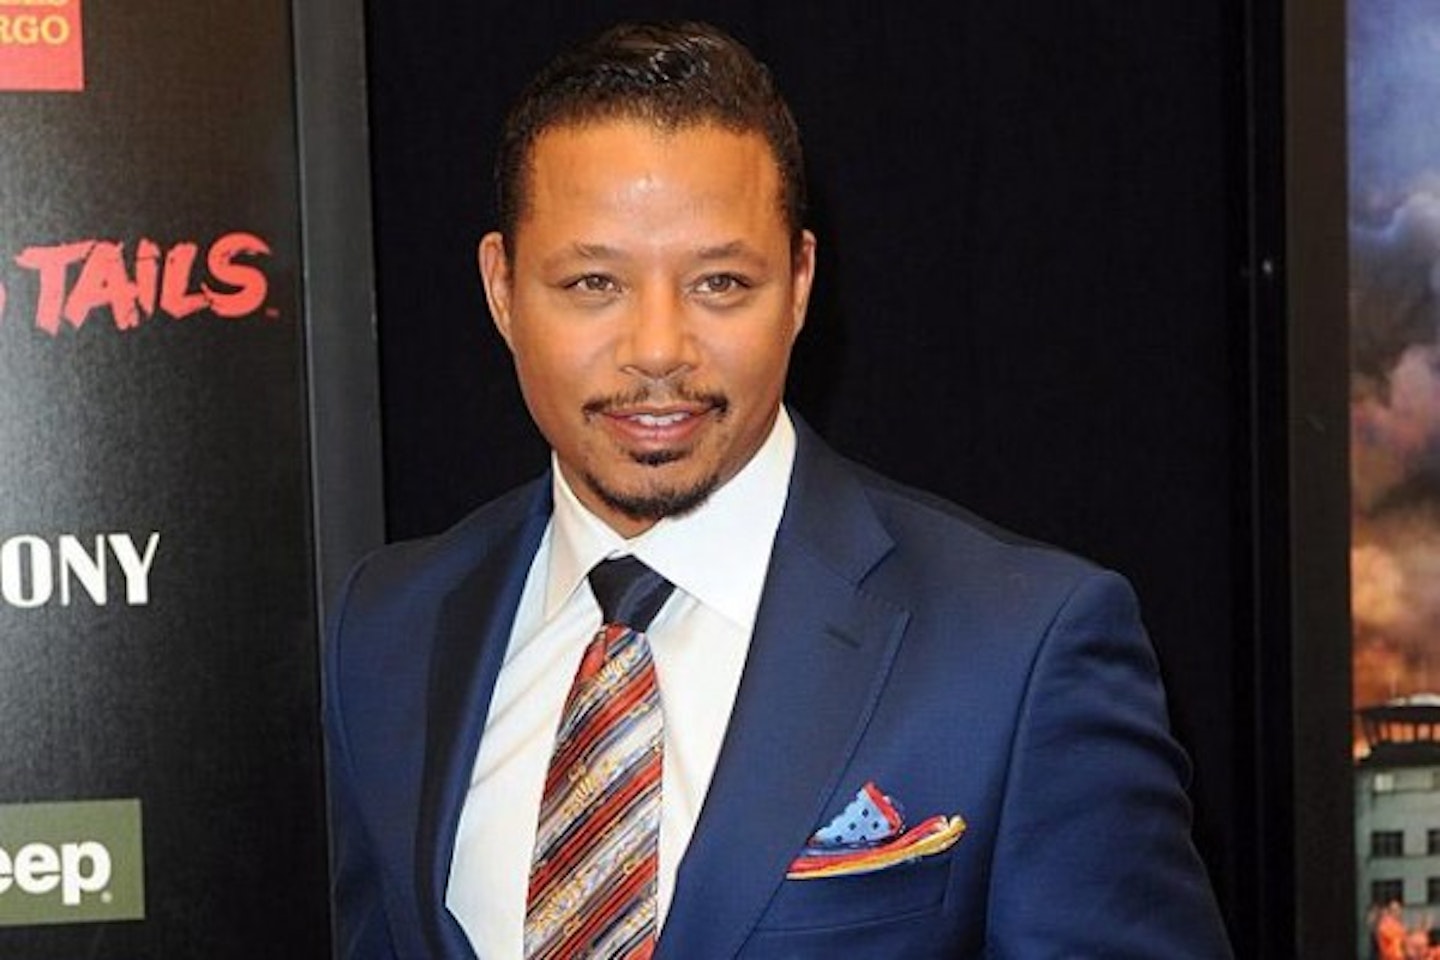 Terrence Howard - Biography